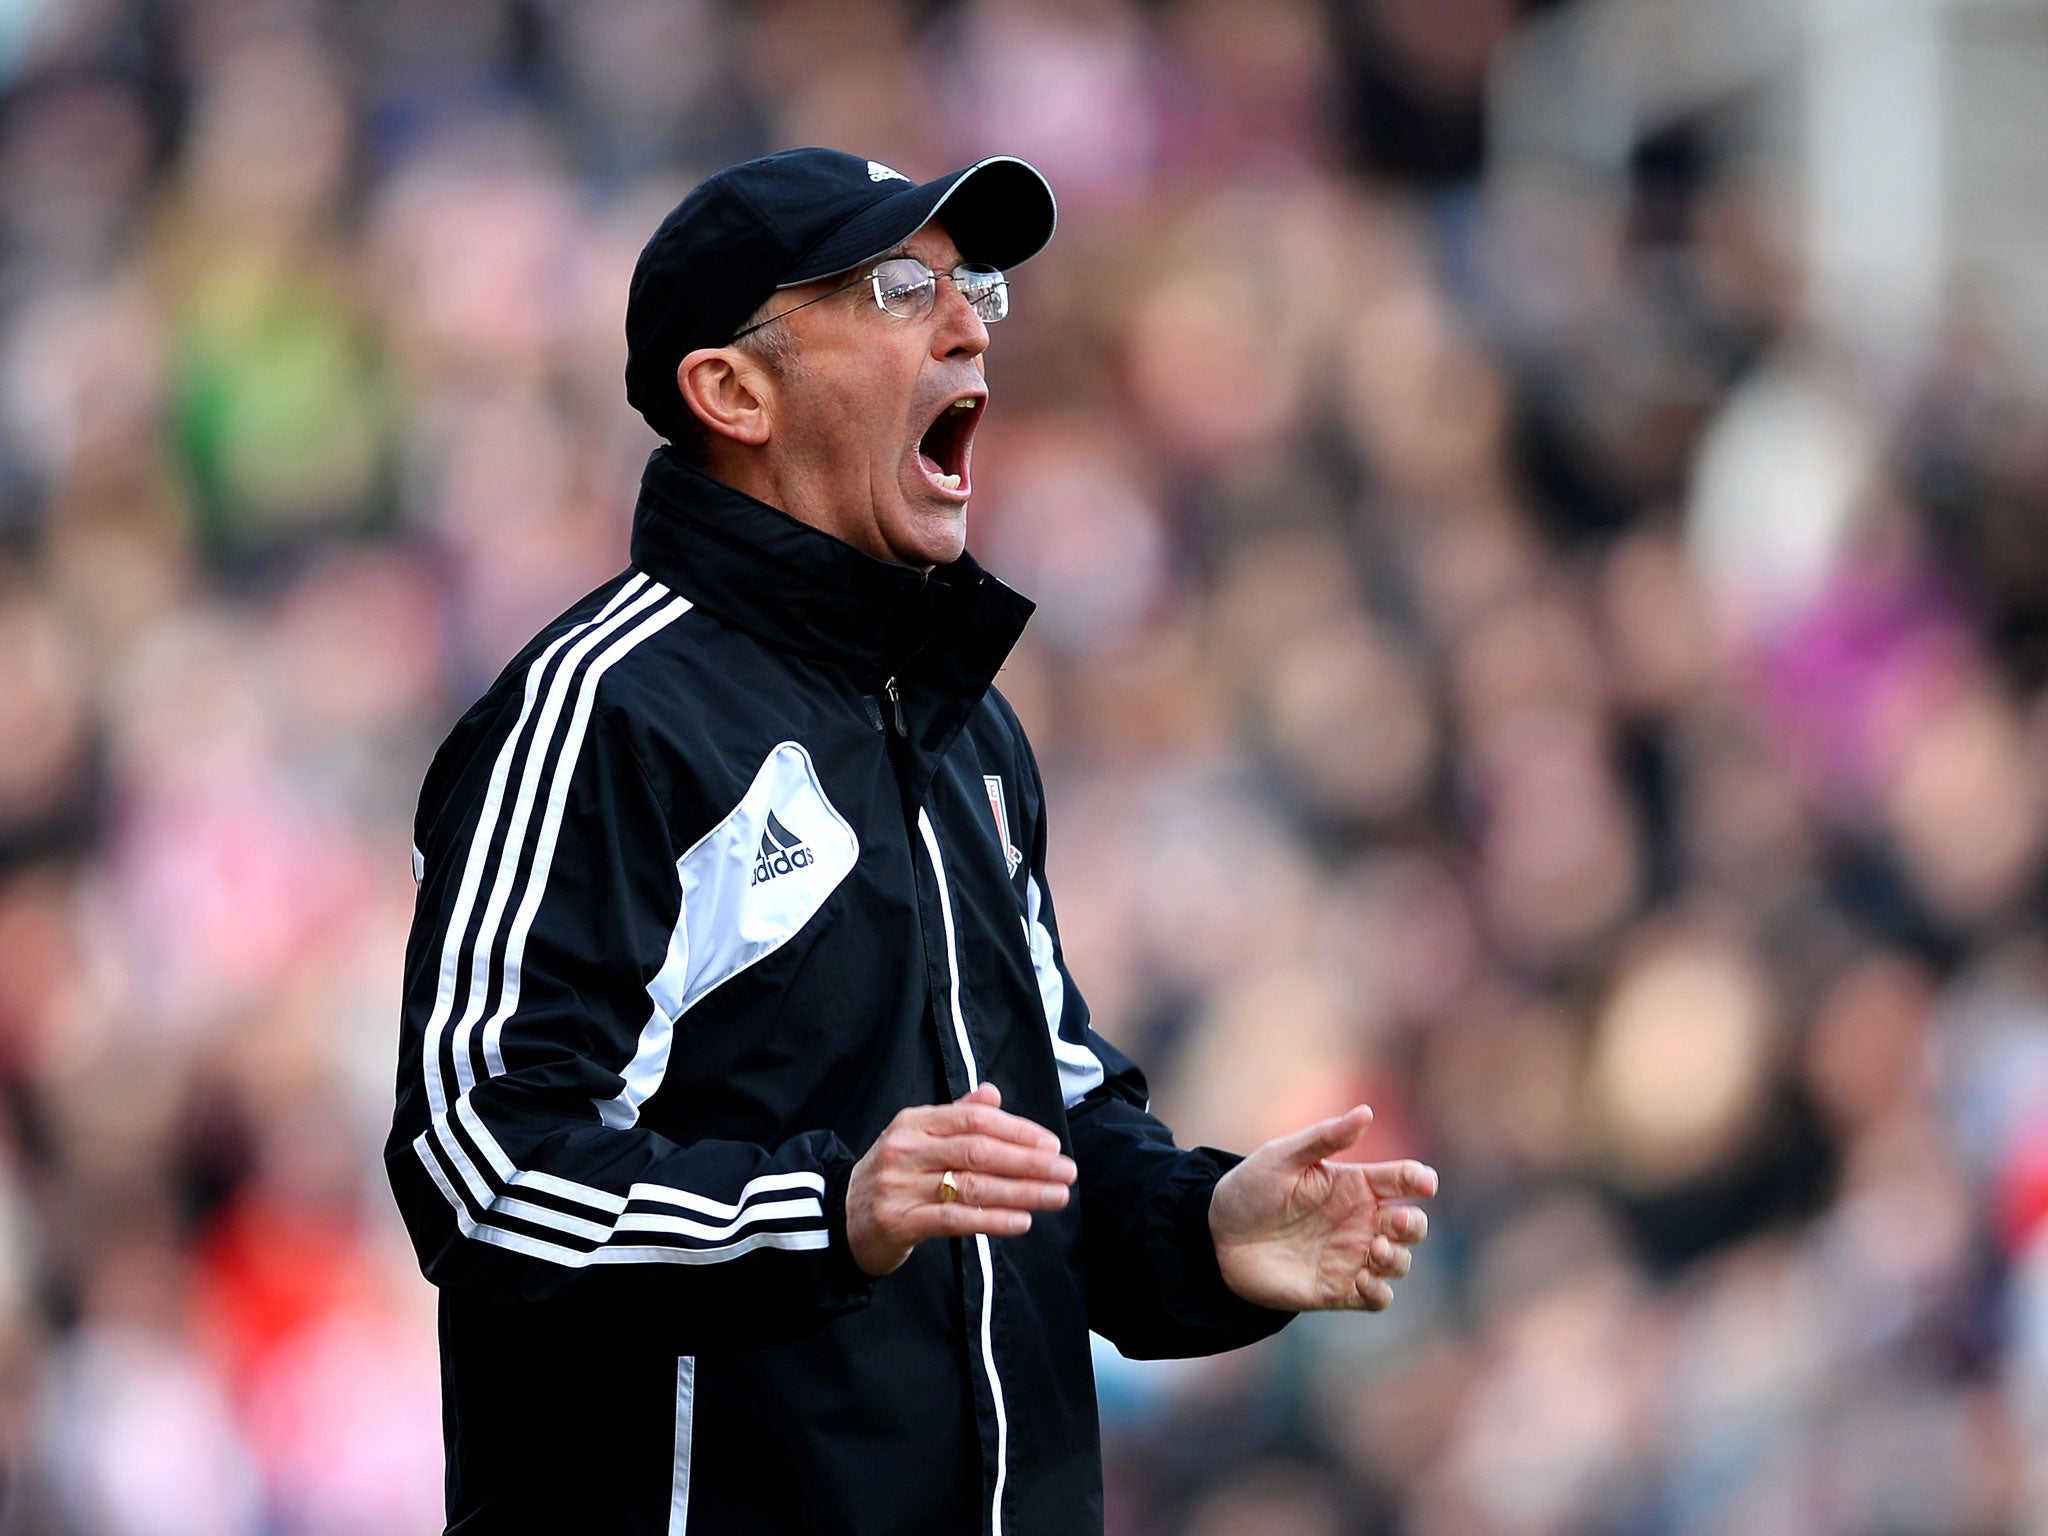 Tony Pulis the Stoke manager shouts instructions to his players